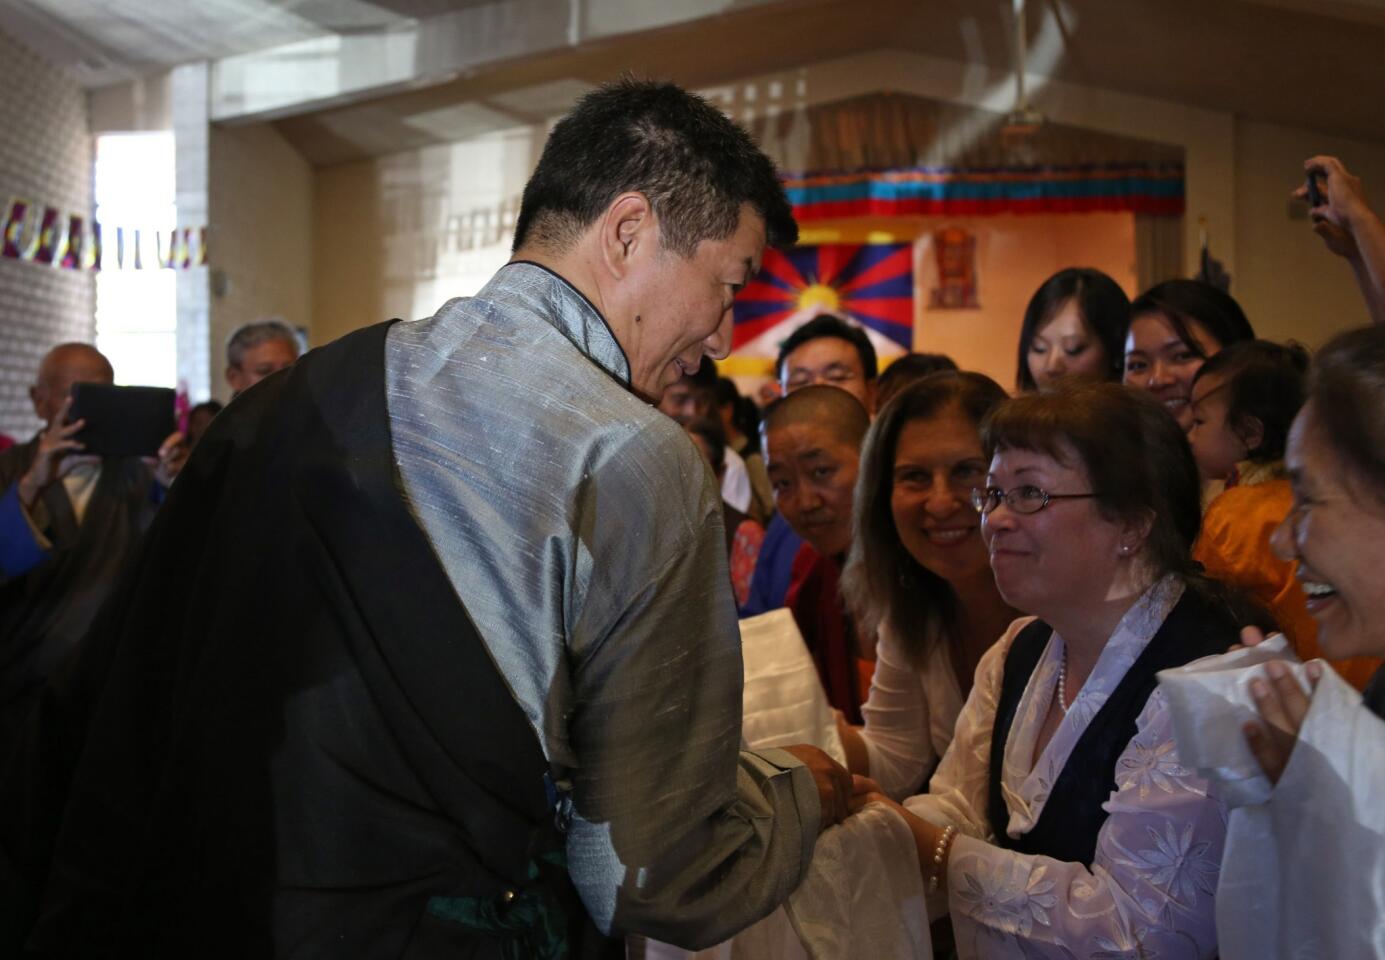 Lobsang Sangay, the prime minister of the Tibetan exile government, greets members of the Southern California Tibetan community on Sunday as he arrives at Covenant Presbyterian Church in Los Angeles to deliver an address.